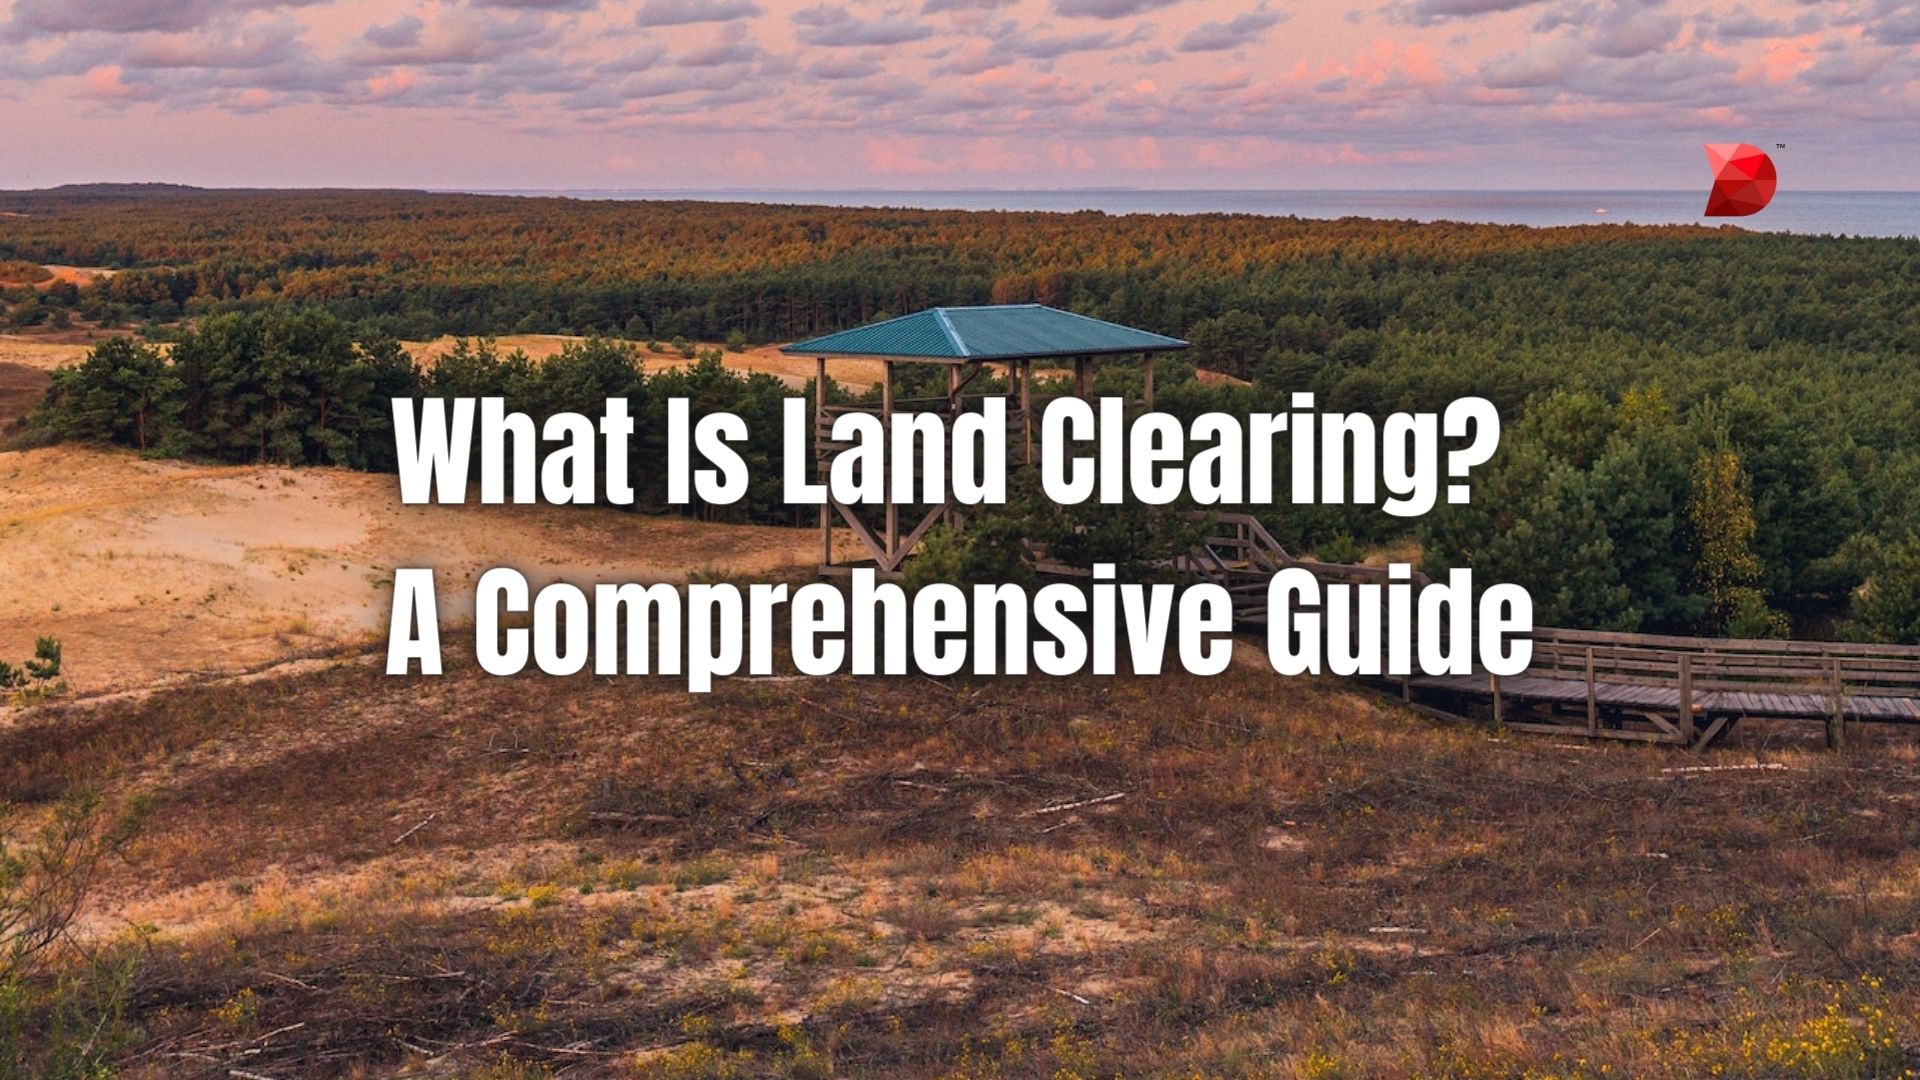 Growing Your Career: Land Clearing Professional Development